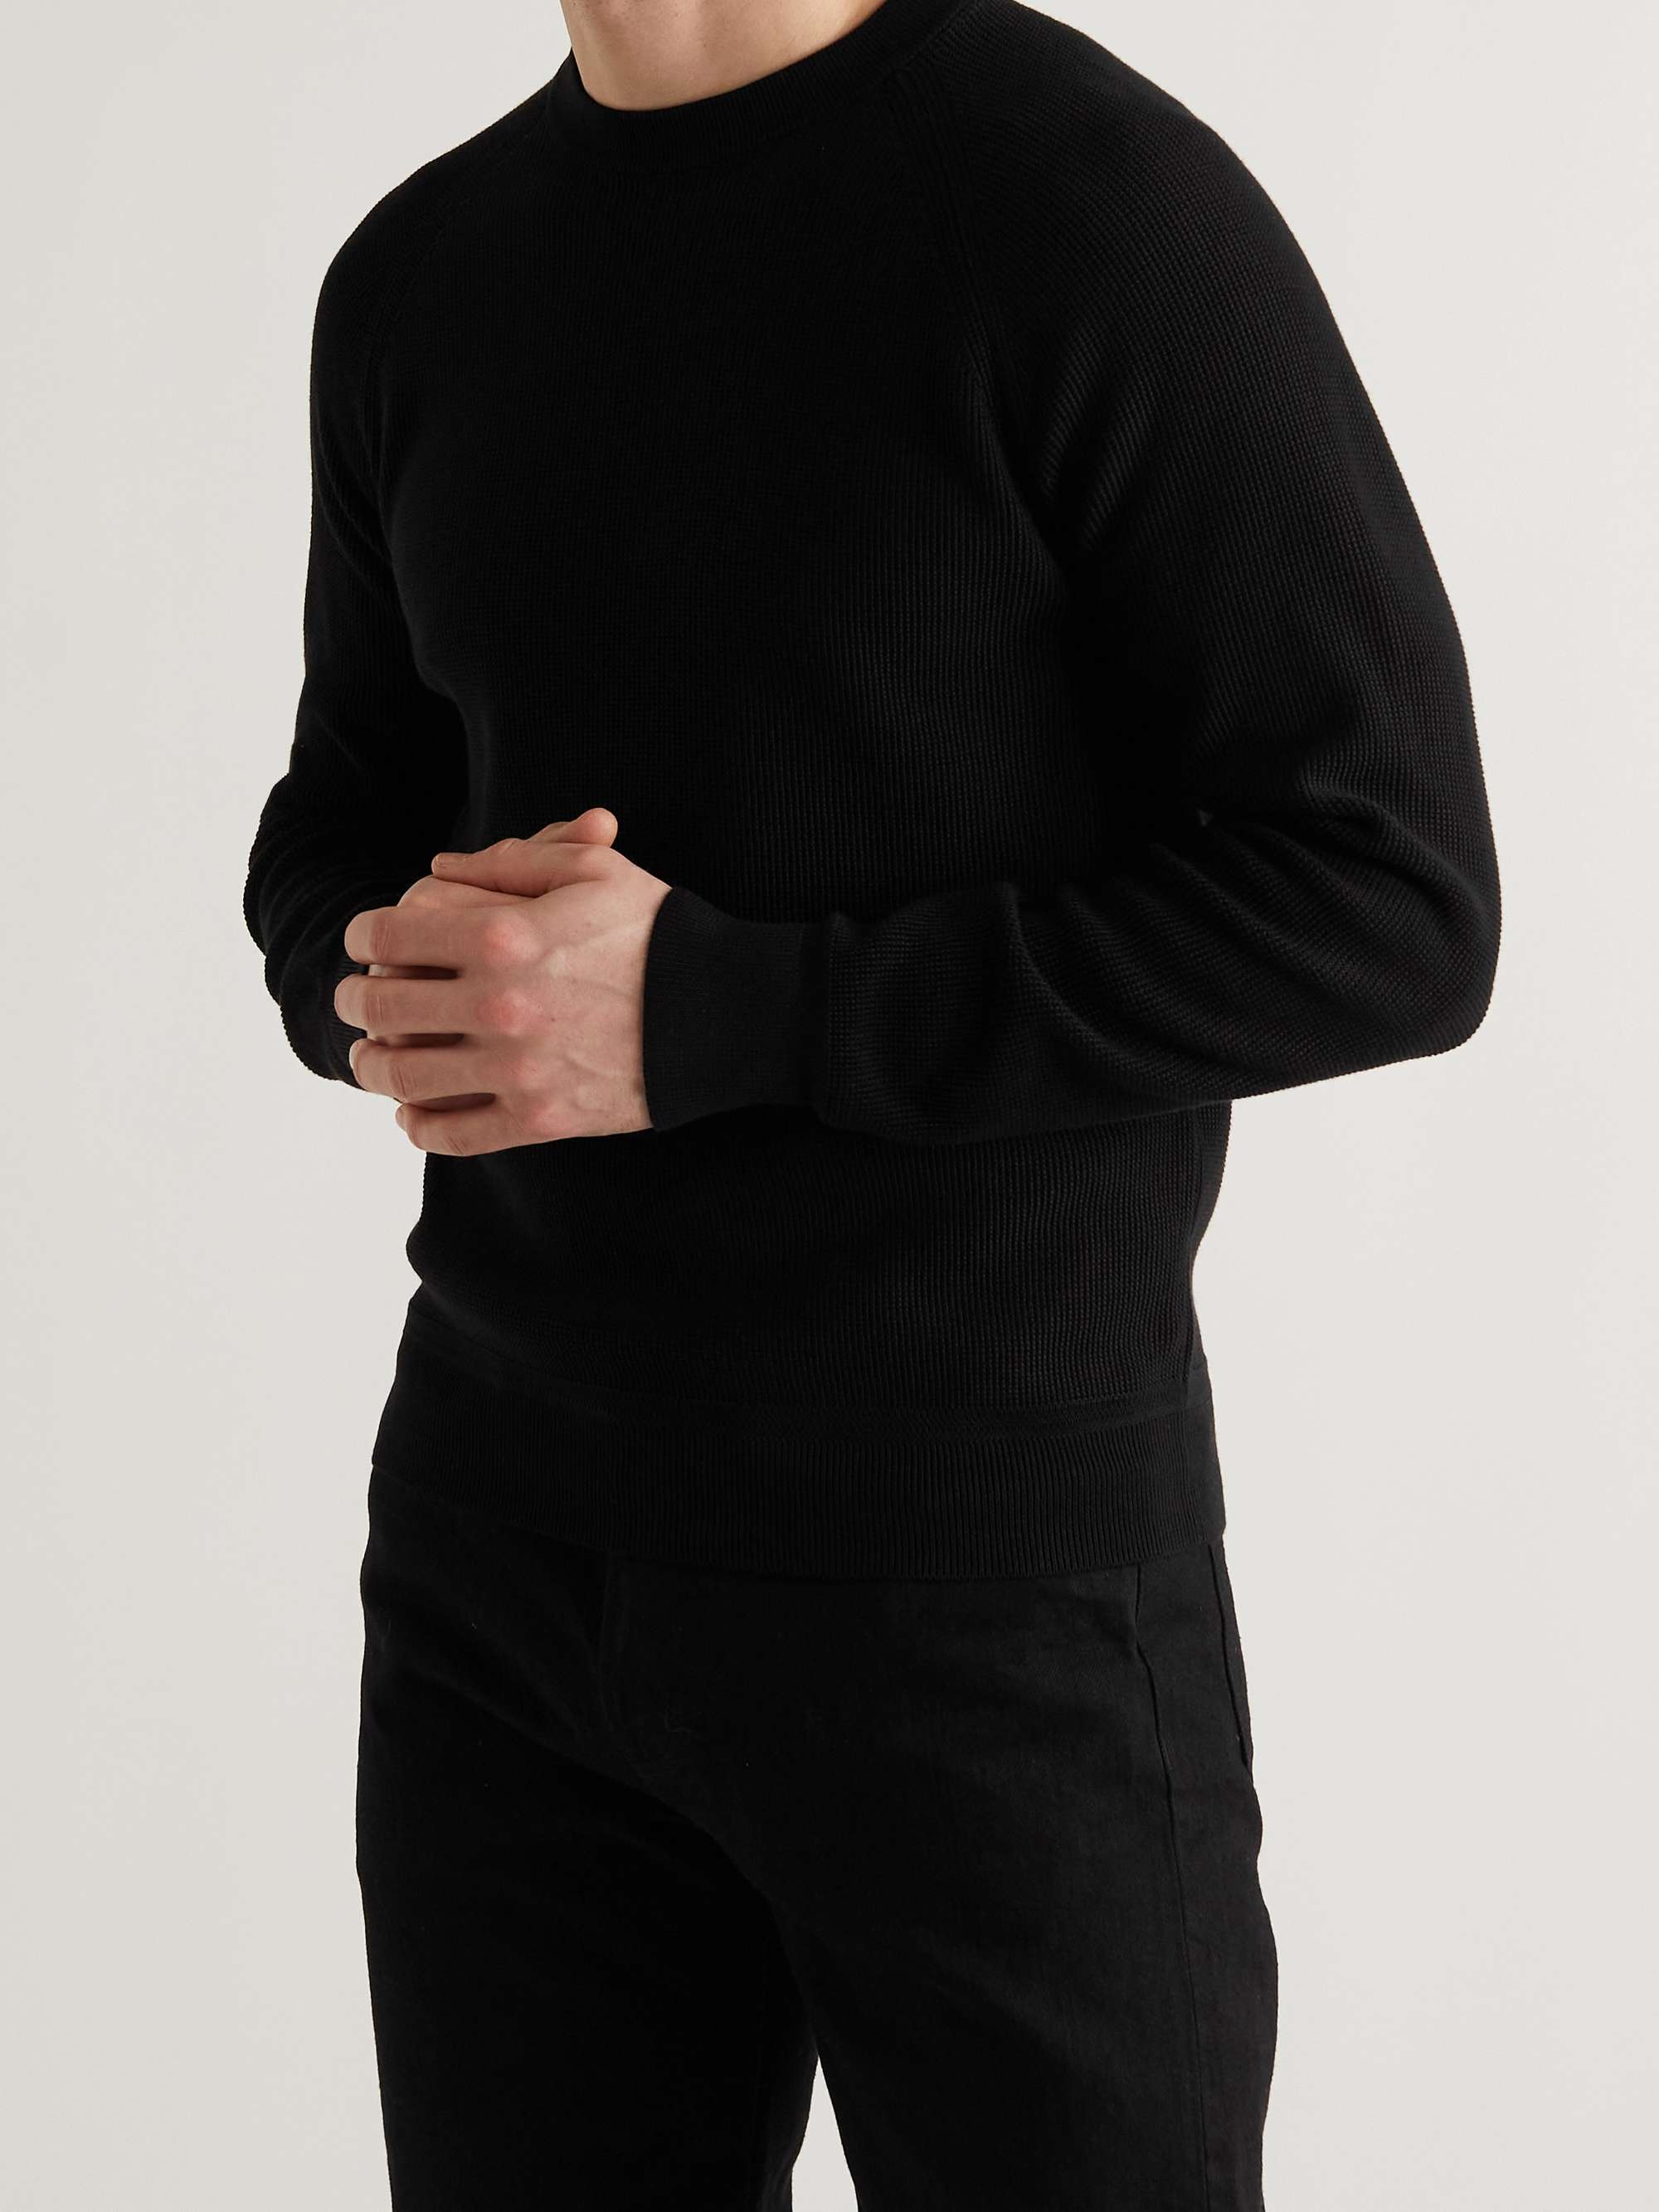 TOM FORD Ribbed Cotton and Silk-Blend Sweater